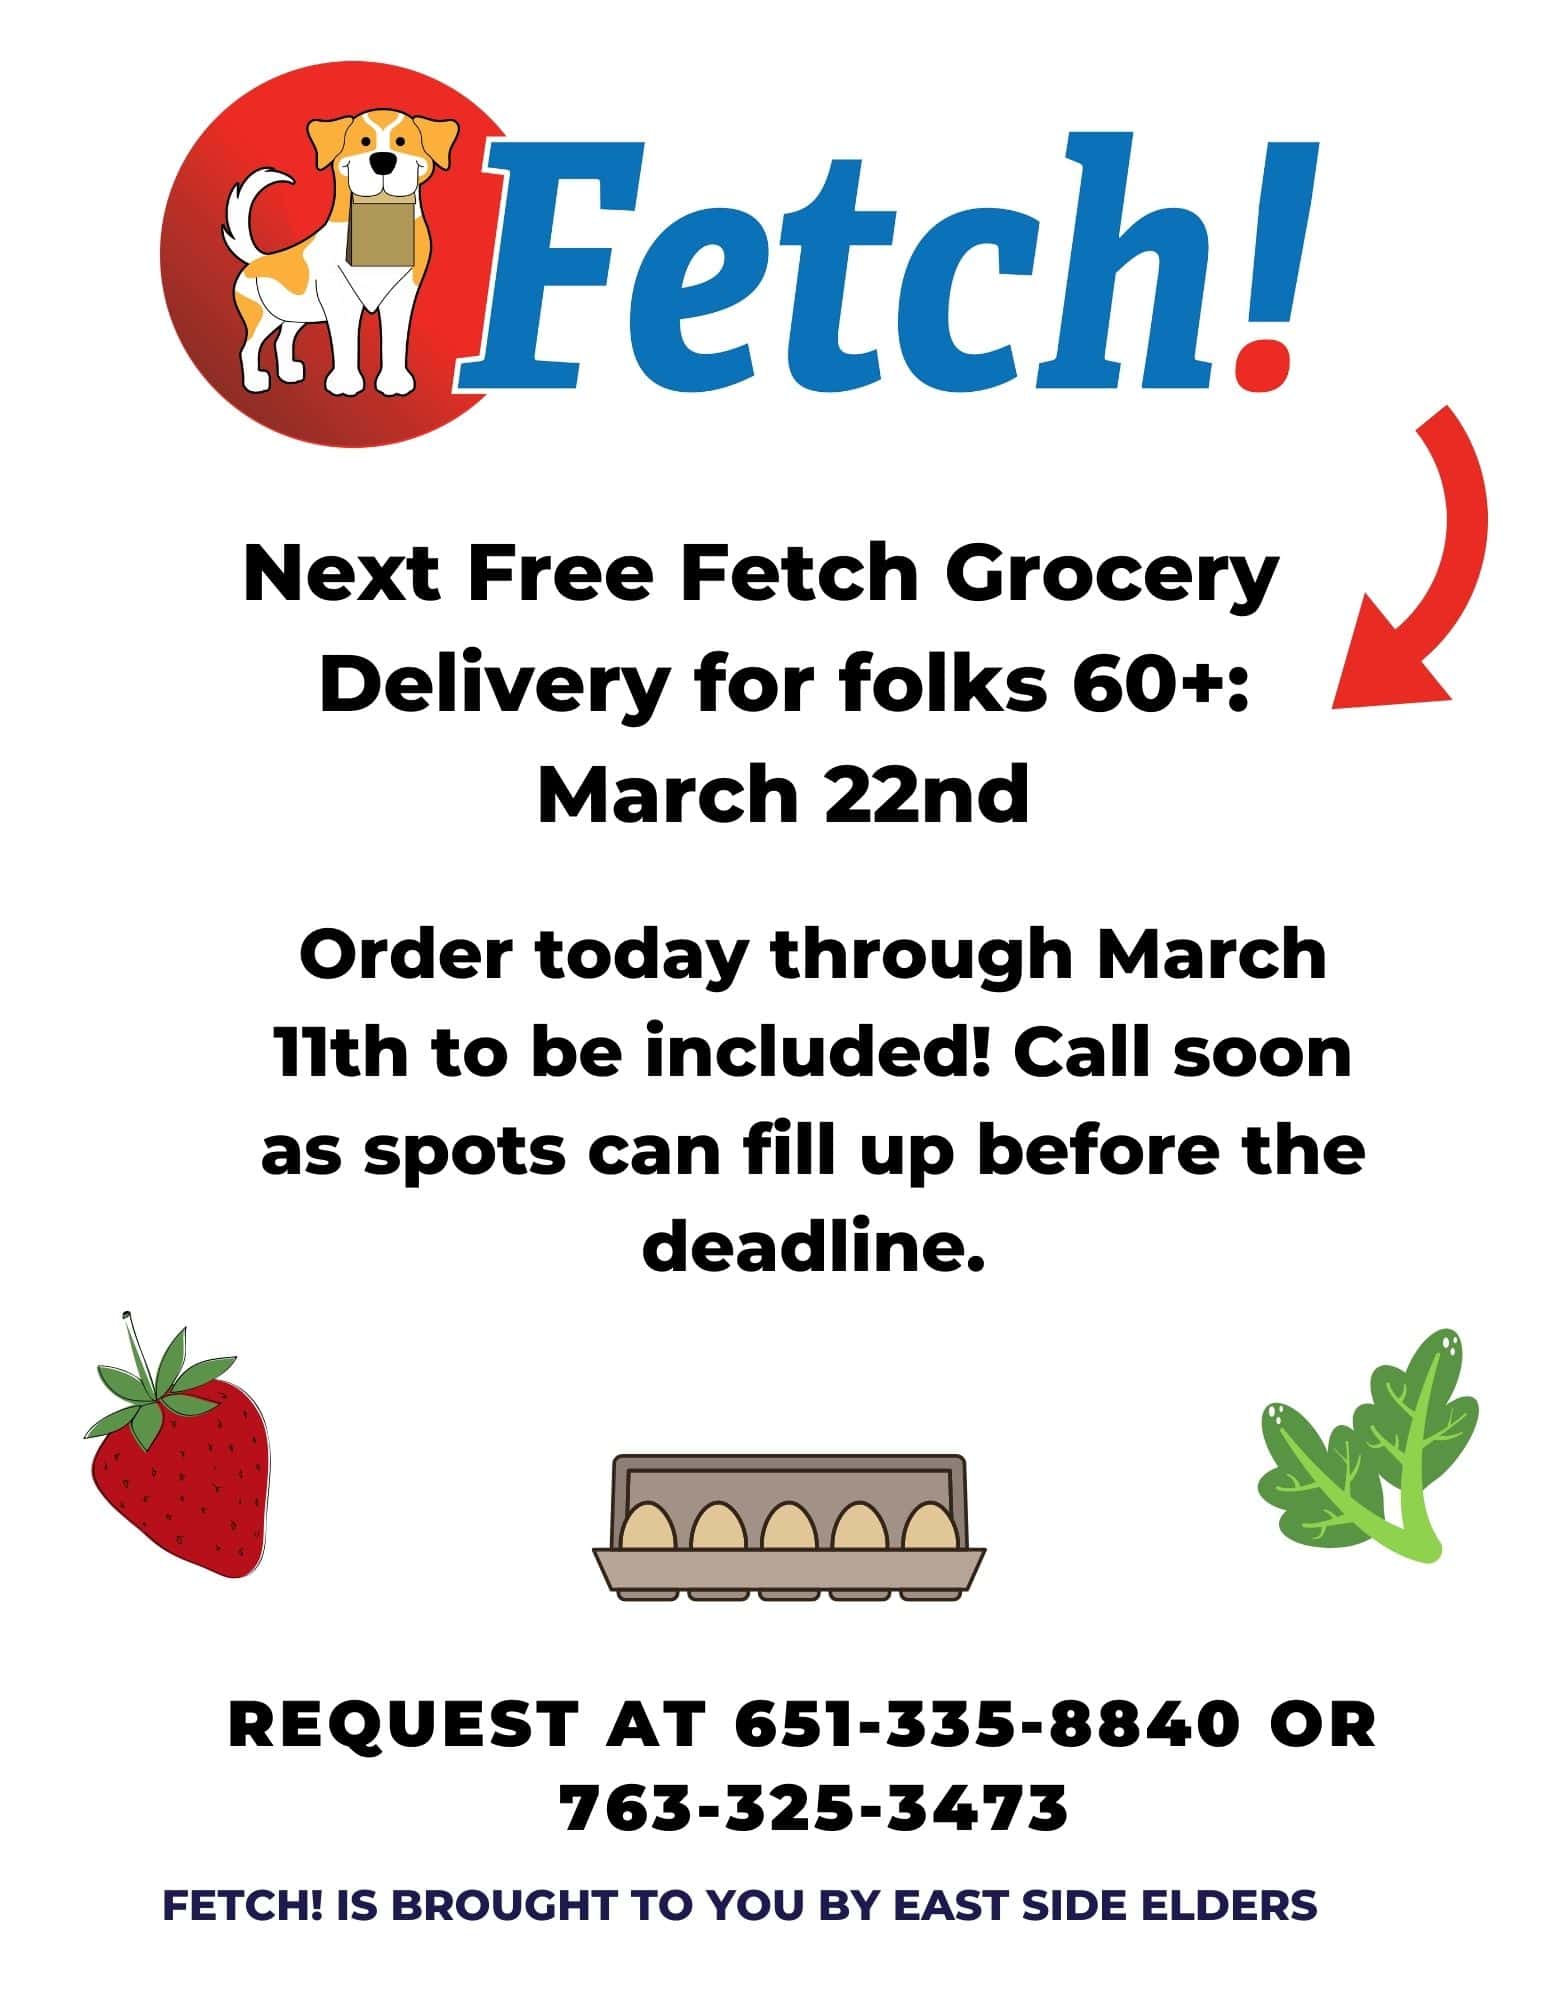 Flyer for the February Fetch! grocery distribution features illustrative images of a strawberry, eggs, and greens. Fetch! logo features a yellow and white dog on a red circle background holding a brown paper bag. Text: Fetch! Next Free Fetch Grocery Delivery for folks 60+: March 22nd. Order today through March 11th to be included! Call soon as spots can fill up before the deadline. Request at 651-335-8840 or 763-325-3473. Fetch! is brought to you by East Side Elders.